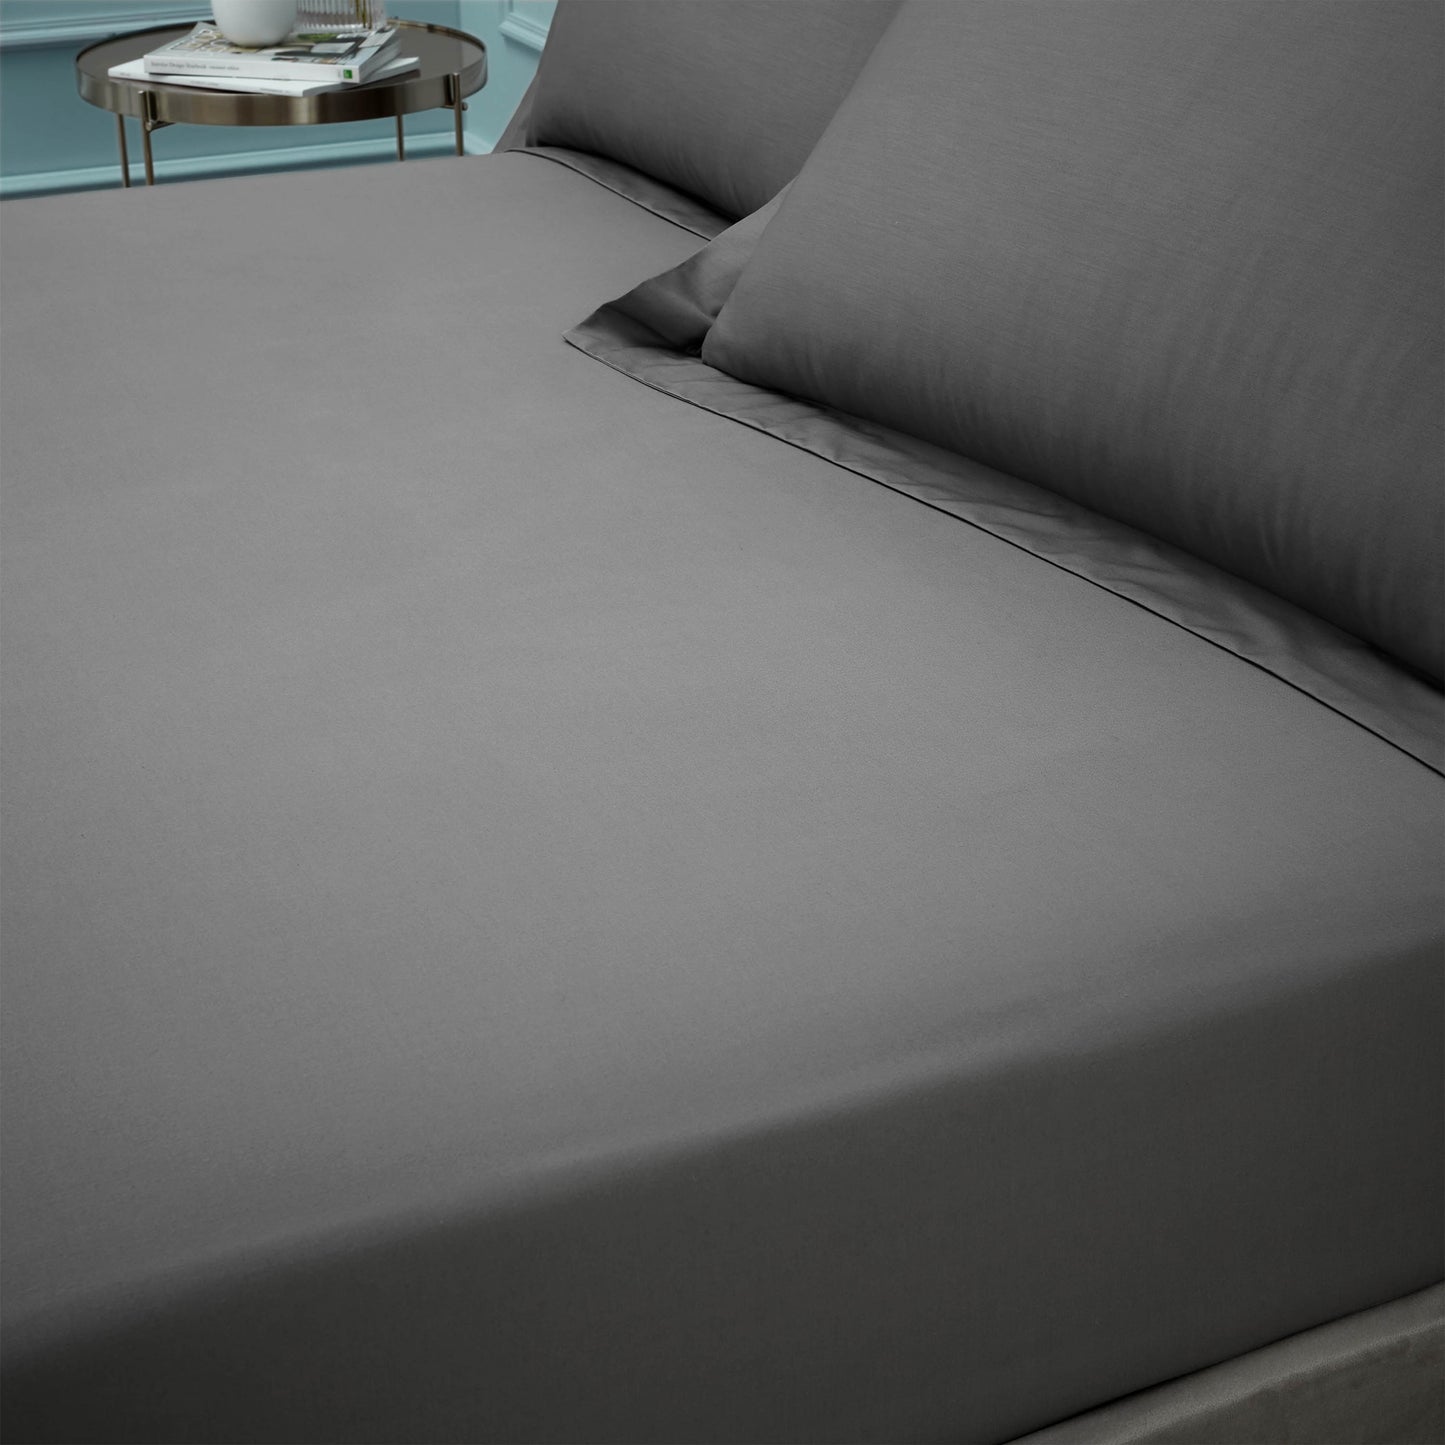 Bianca Charcoal Grey 180TC Egyptian 100% Cotton Deep (34cm) Fitted Sheet